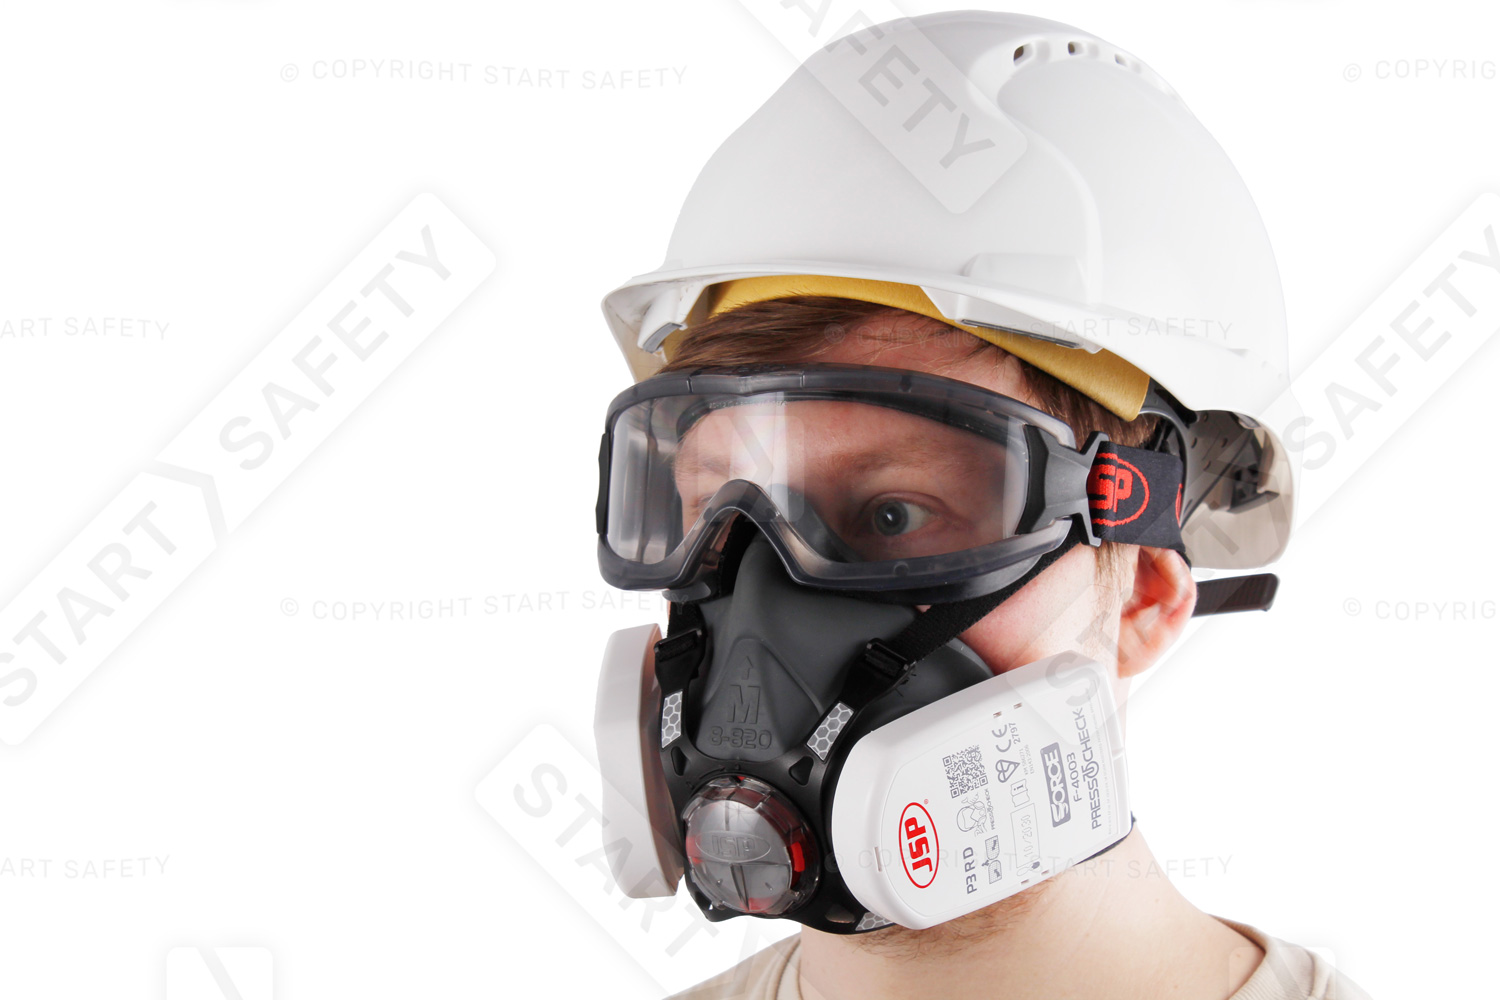 Force8 Half Mask Is Compatible With A Wide Range Of Other JSP PPE